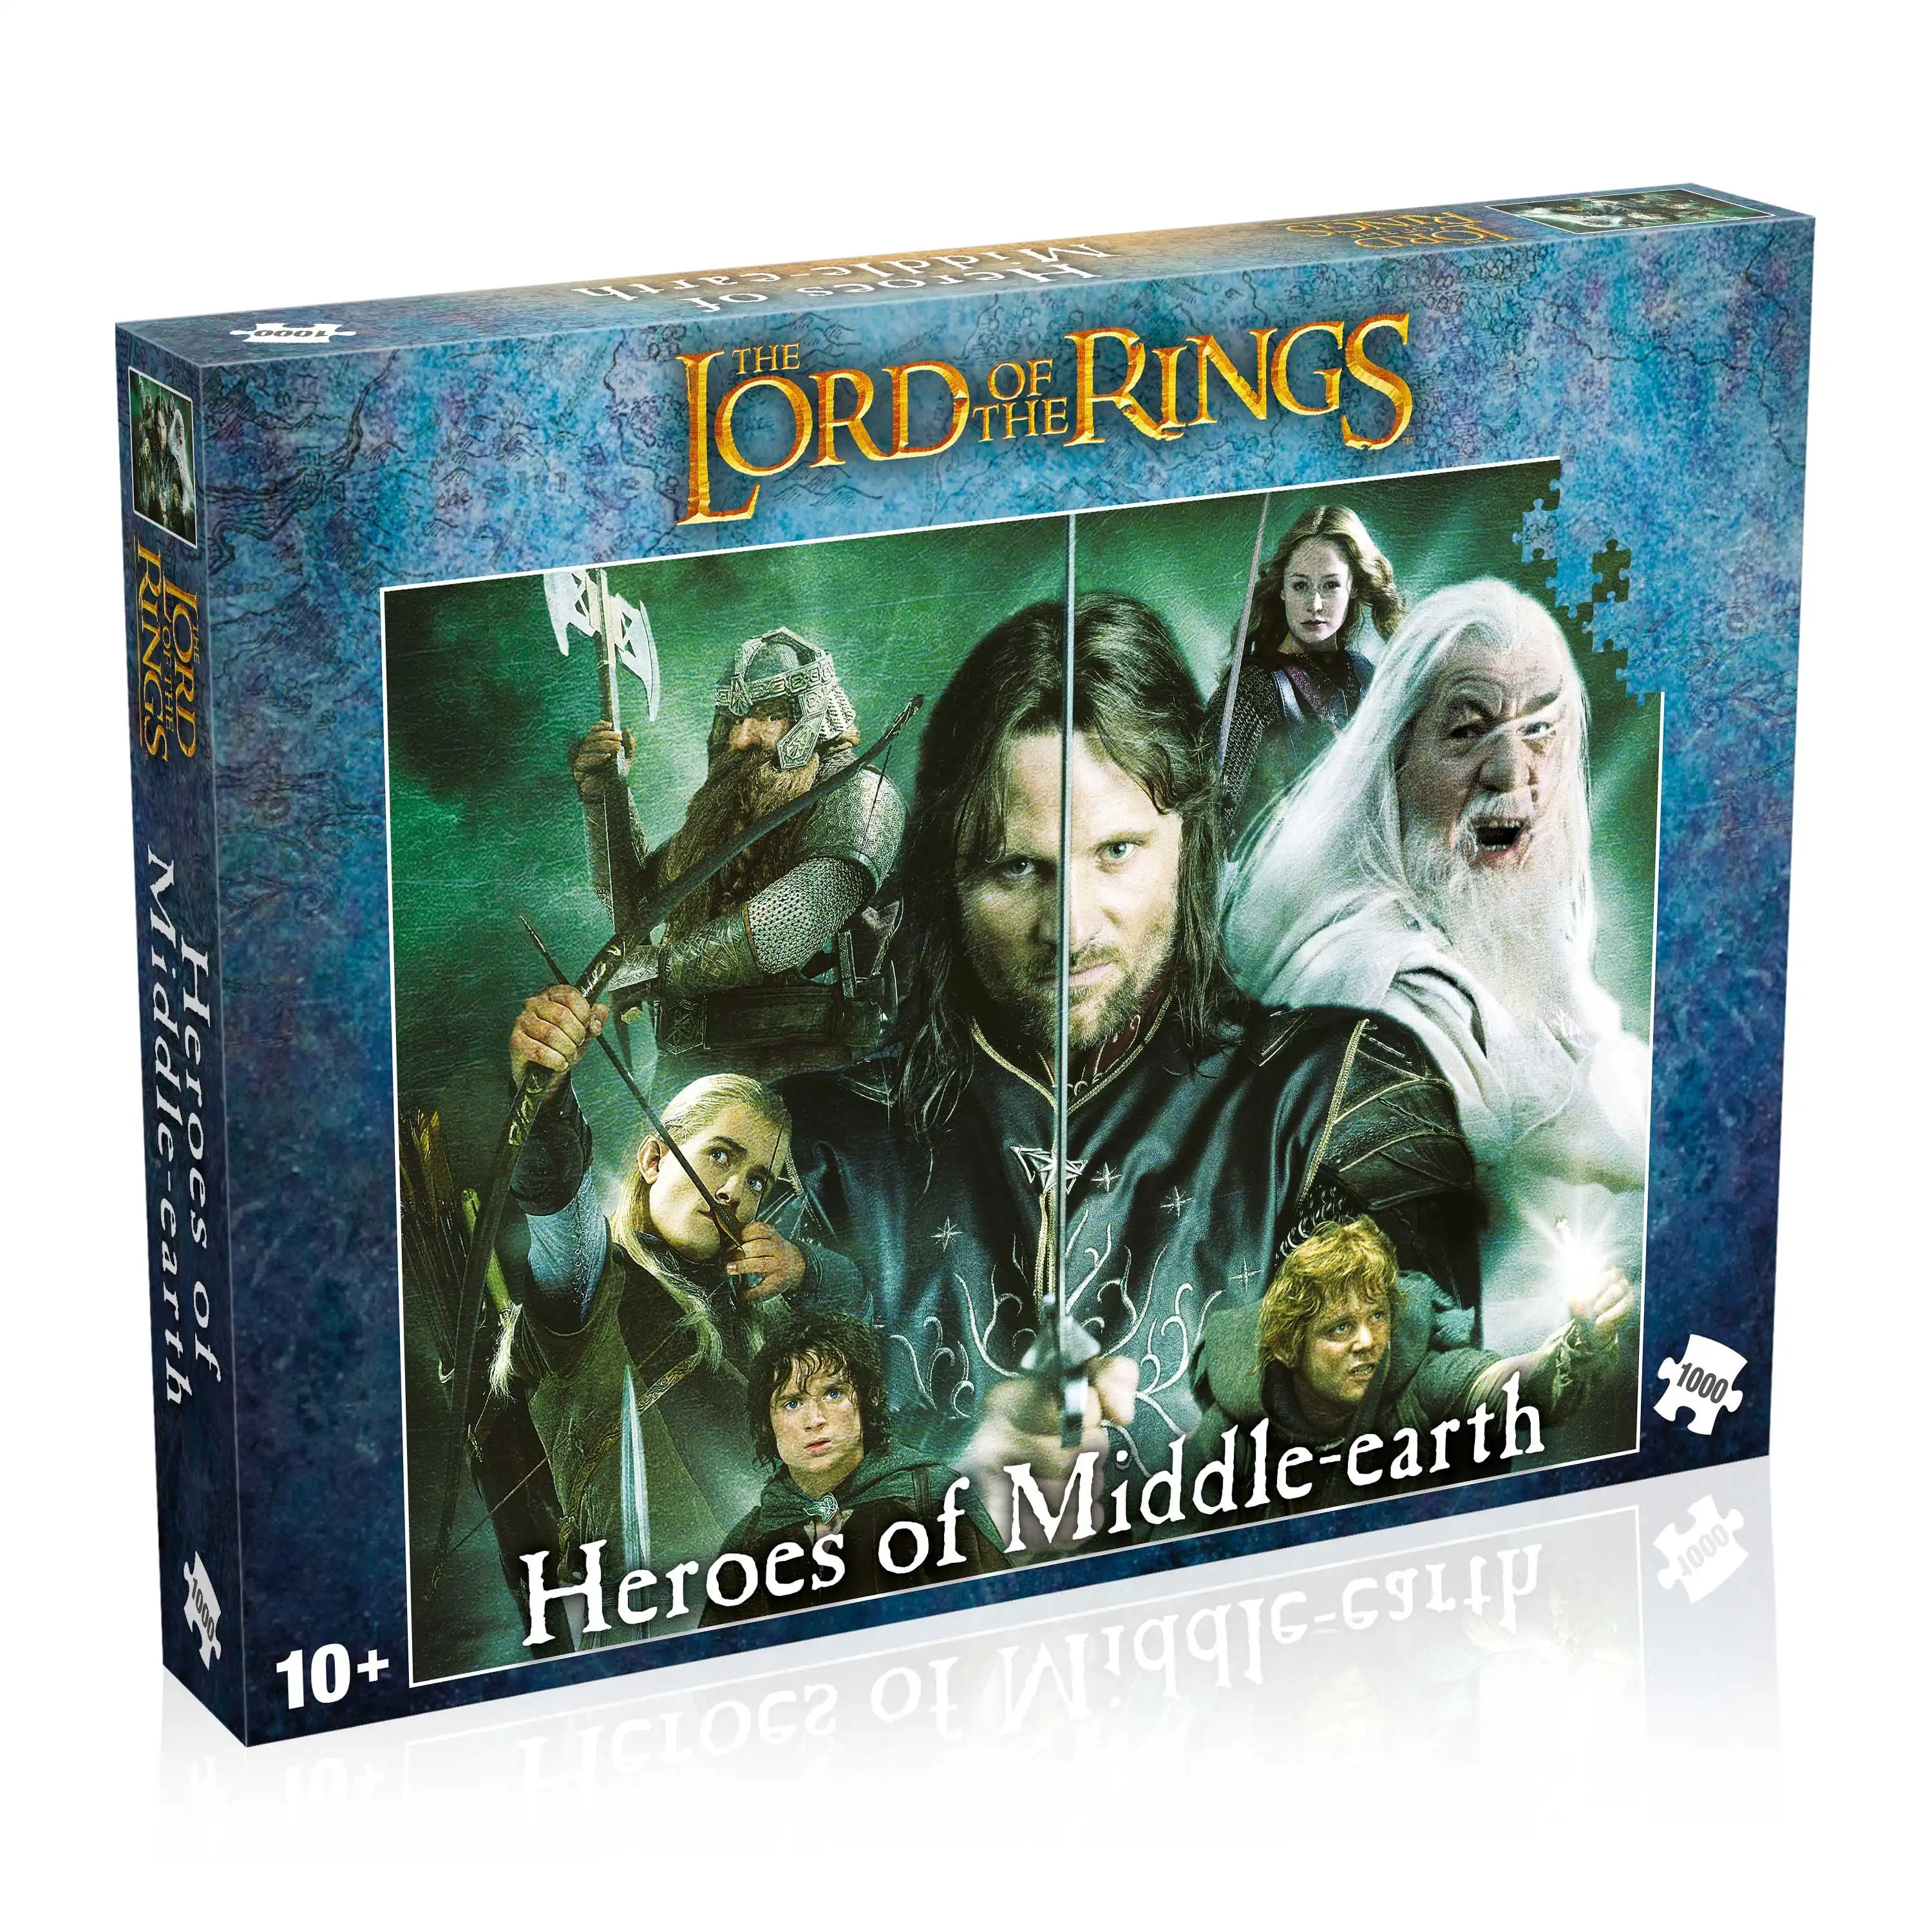 1000-Piece Jigsaw Puzzle, Lord of The Rings 'Heroes of the Middle'